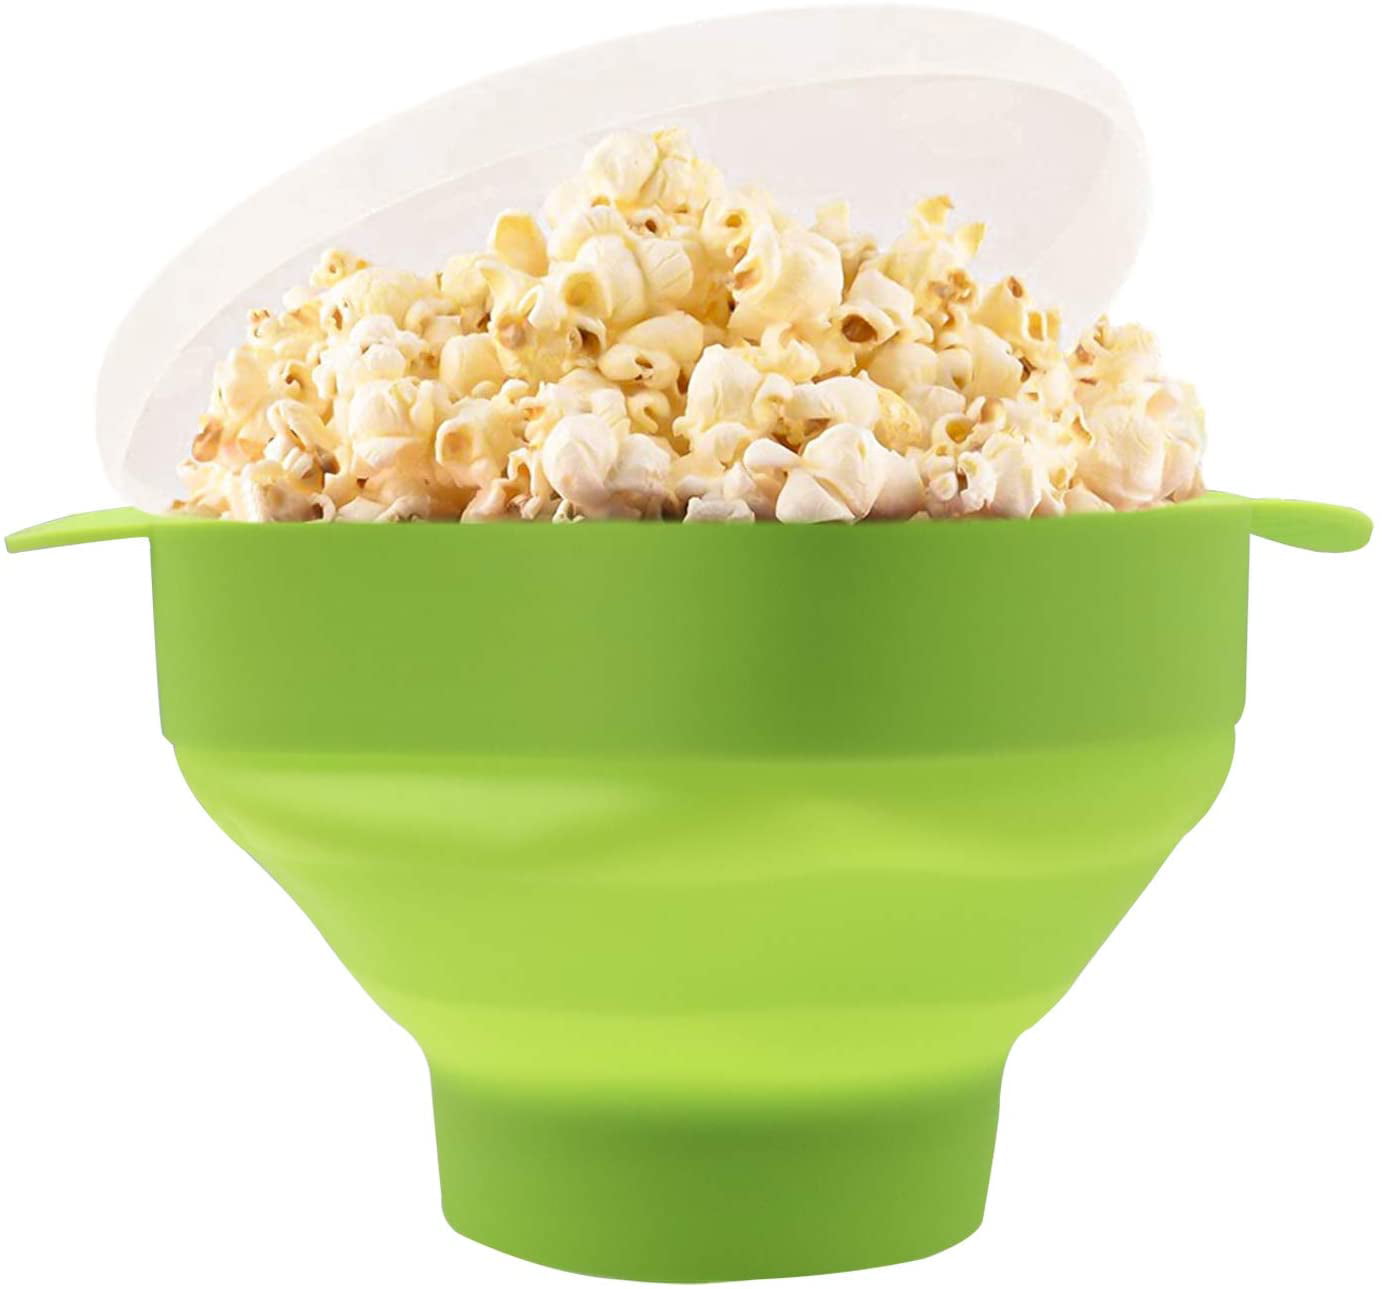 Silicone Microwave Popcorn Maker Fat Free Home Kitchen Popcorn Bowl With Lid 